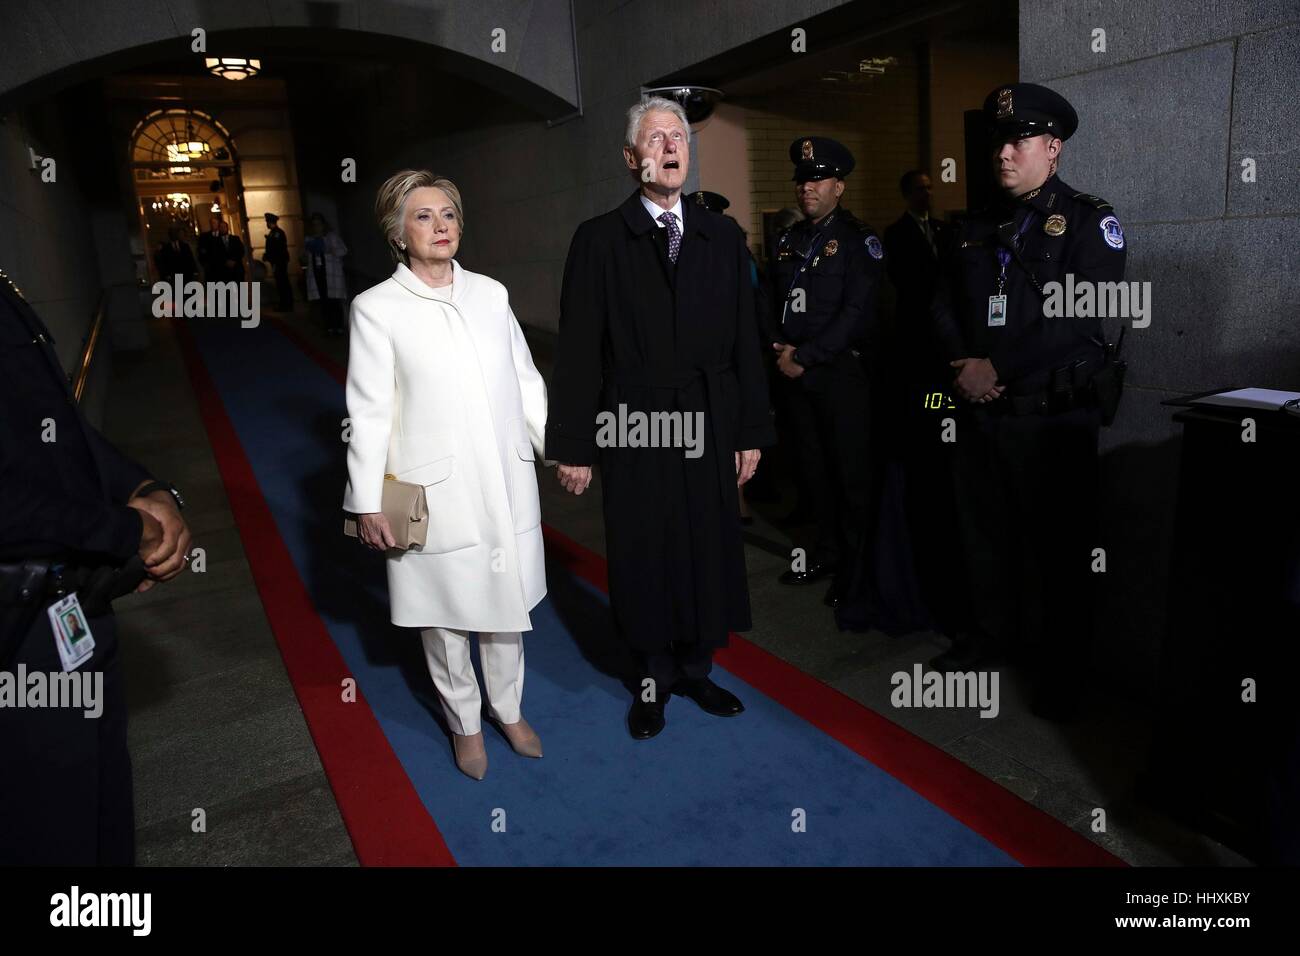 Former Sen. Hillary Clinton and former President Bill Clinton arrive on the West Front of the U.S. Capitol on Friday, Jan. 20, 2017, in Washington, for the inauguration ceremony of Donald J. Trump as the 45th president of the United States. (Win McNamee/Pool Photo via AP) Stock Photo